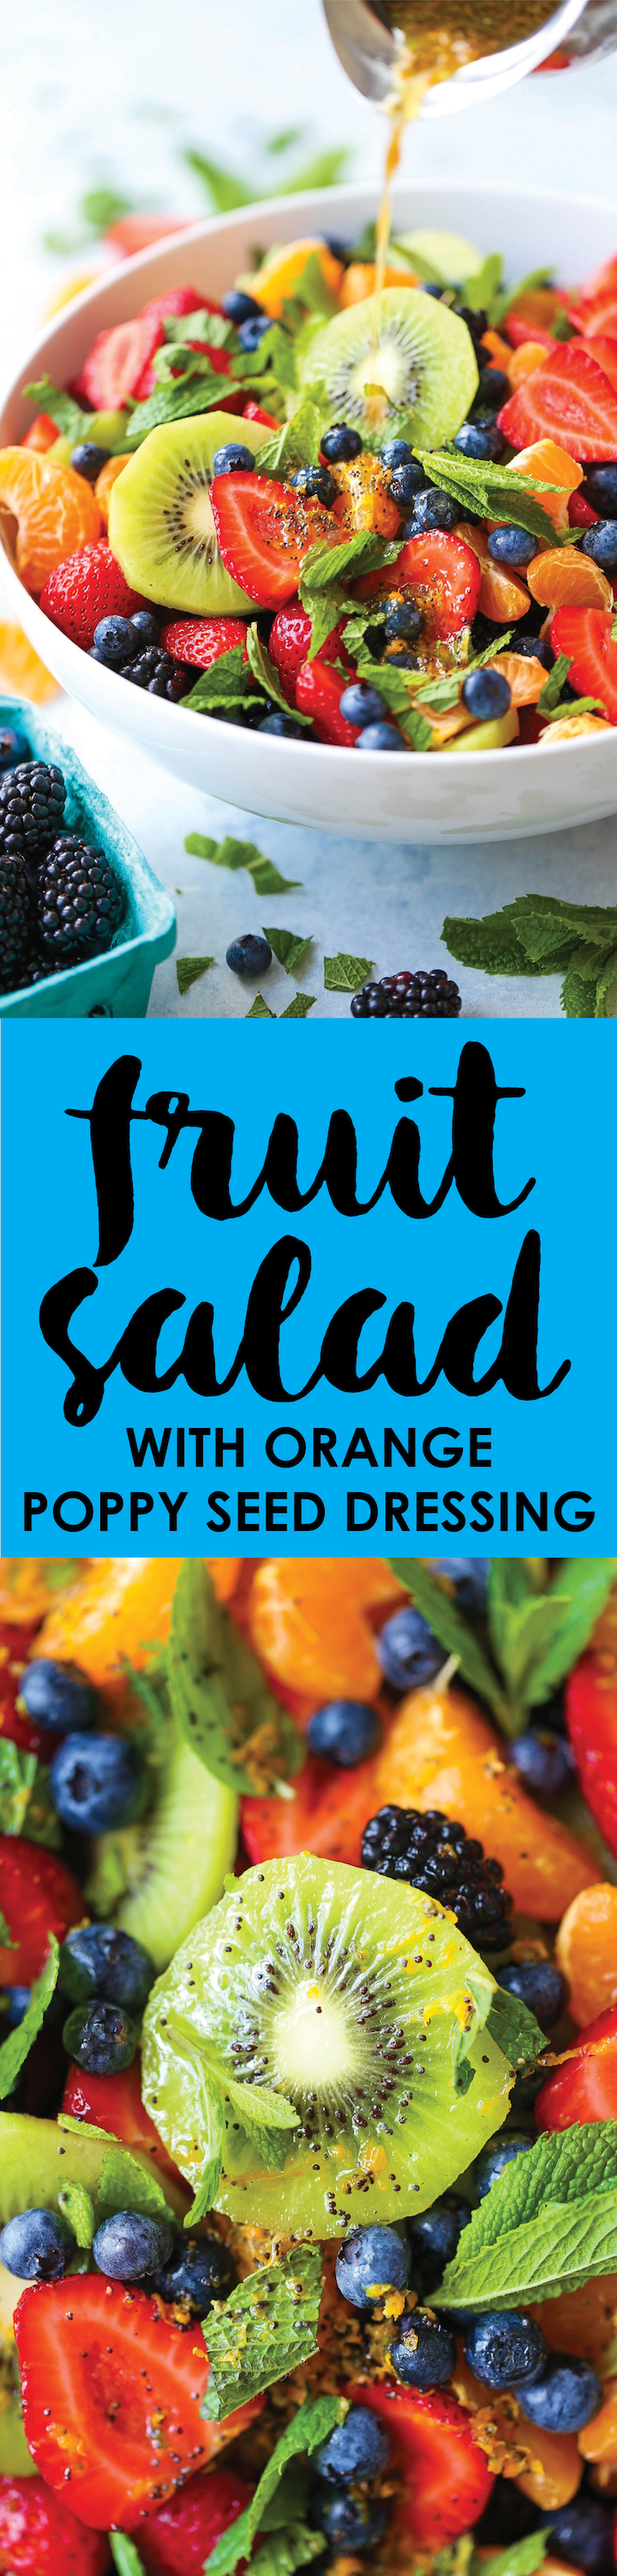 Easy Fruit Salad with Orange Poppy Seed Dressing - Simply the best and easiest fruit salad! You can use fruits in season but the BEST part is the dressing!